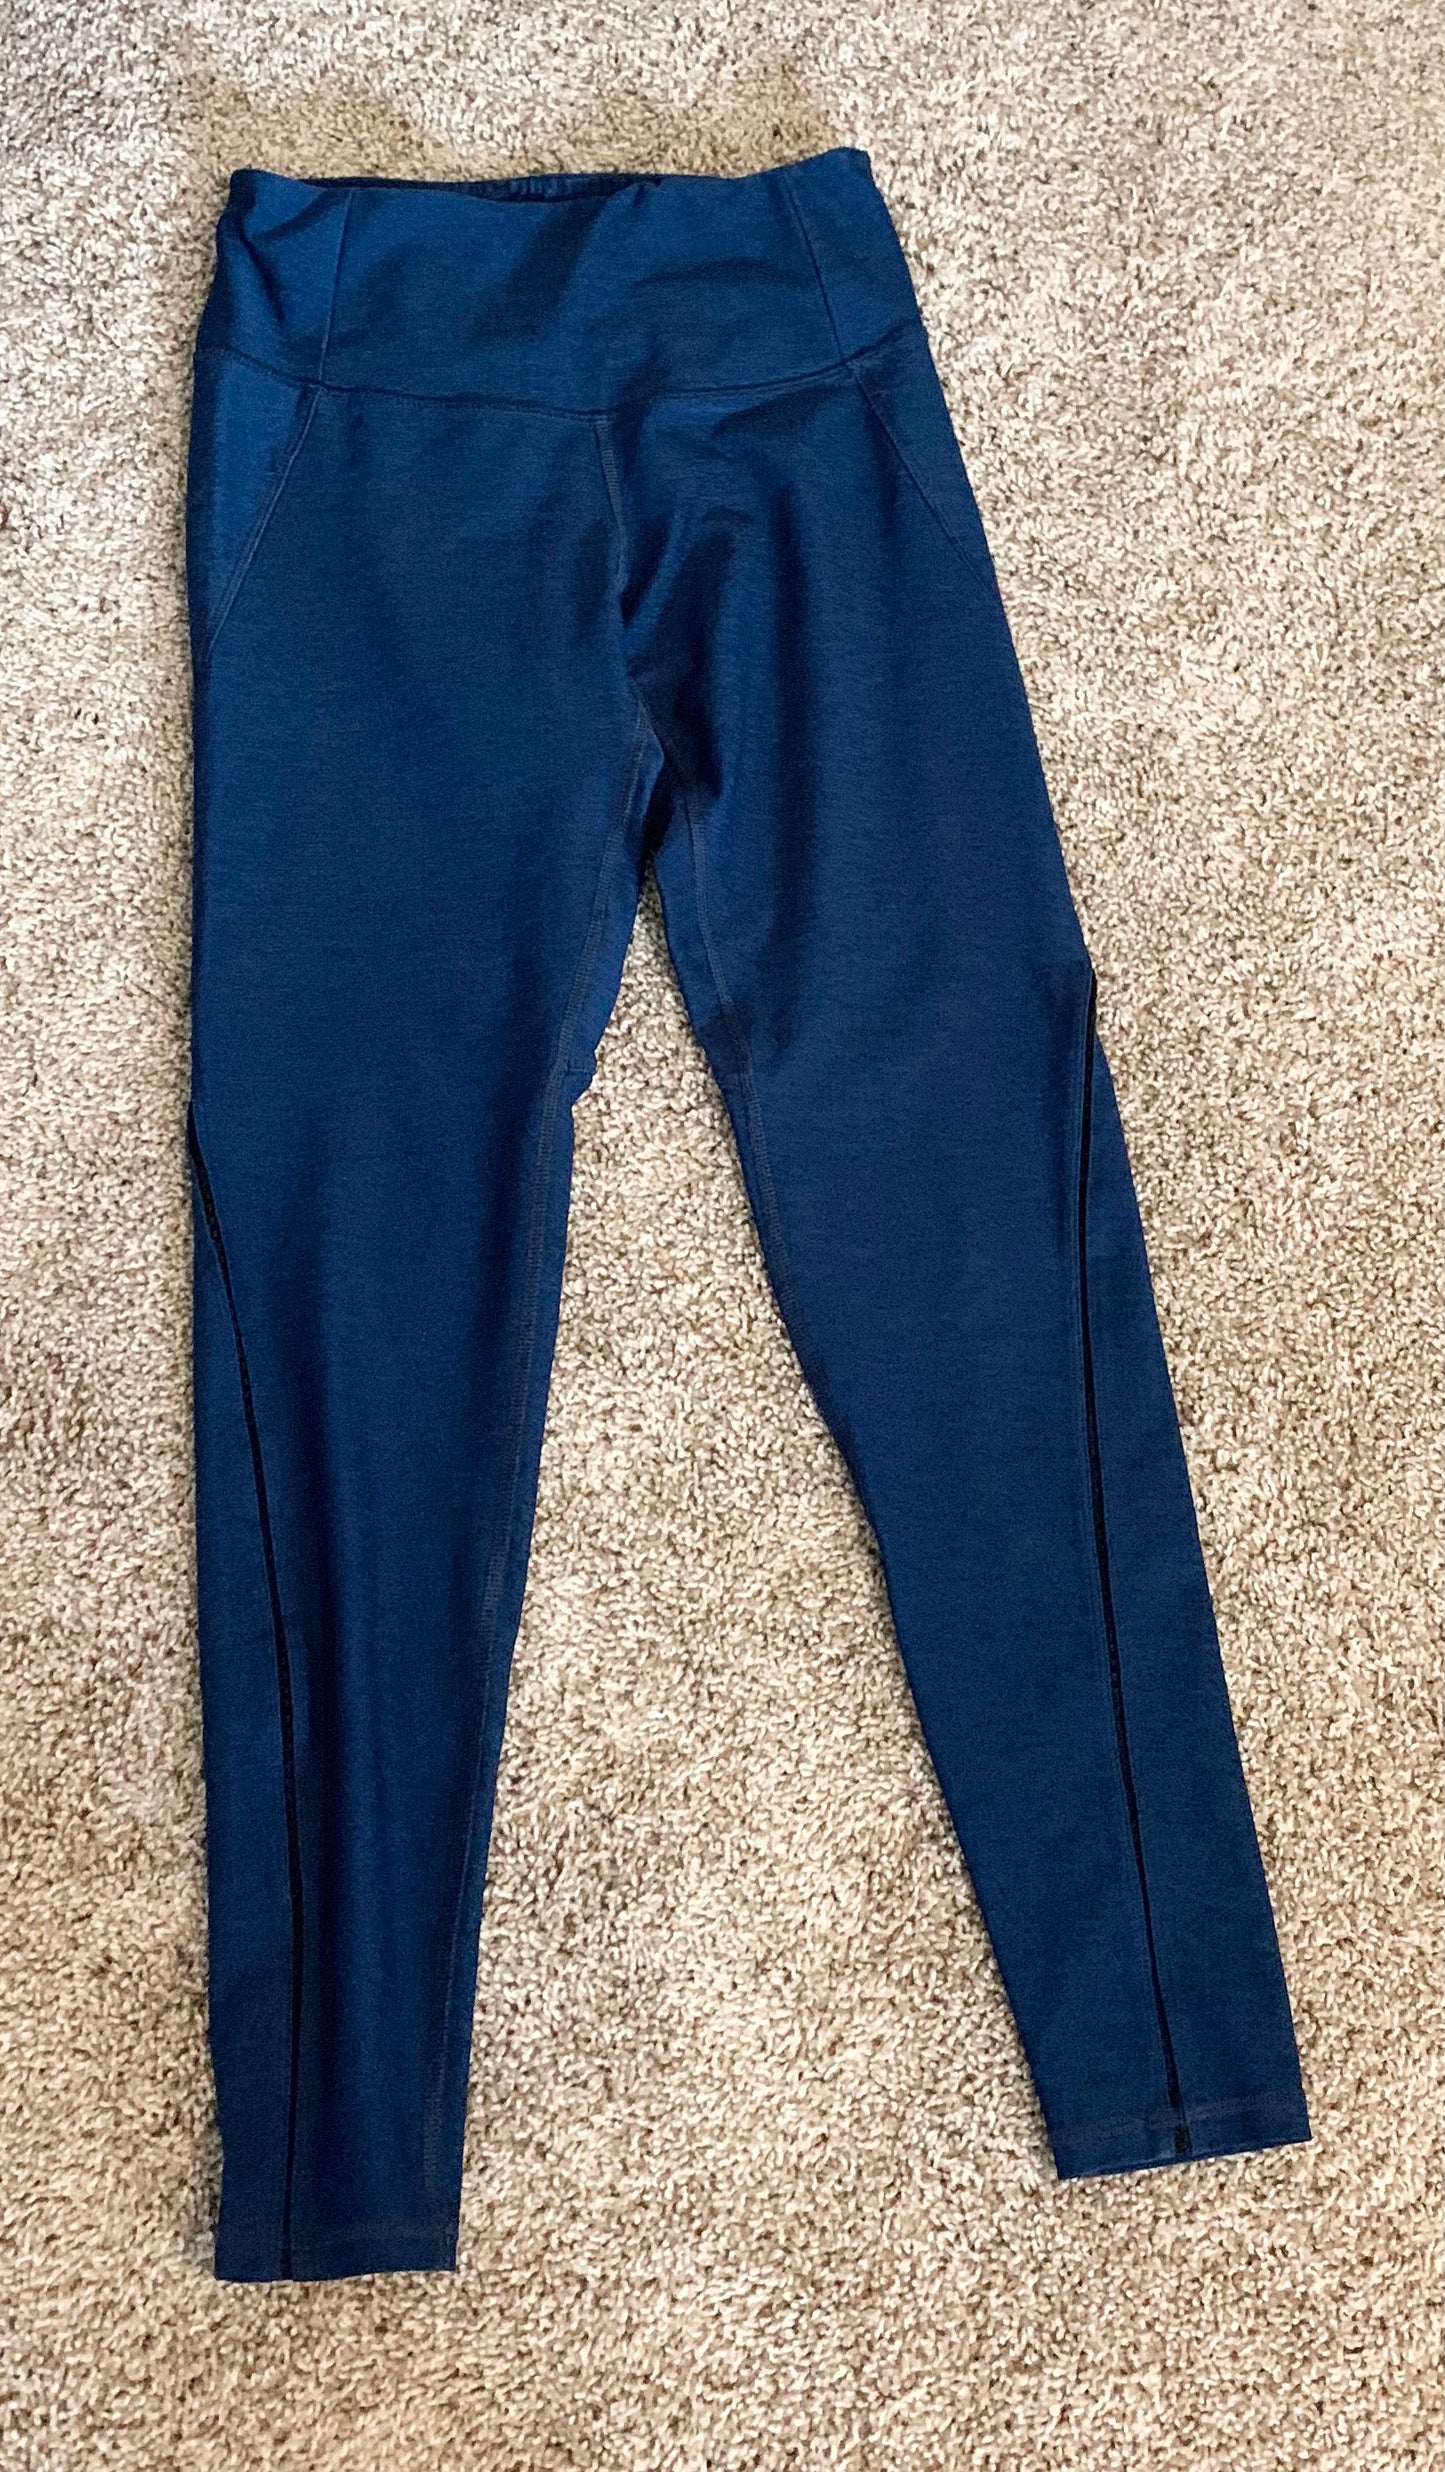 Women's Small / Champion Active Leggings with Peek-a-Boo Sides EUC